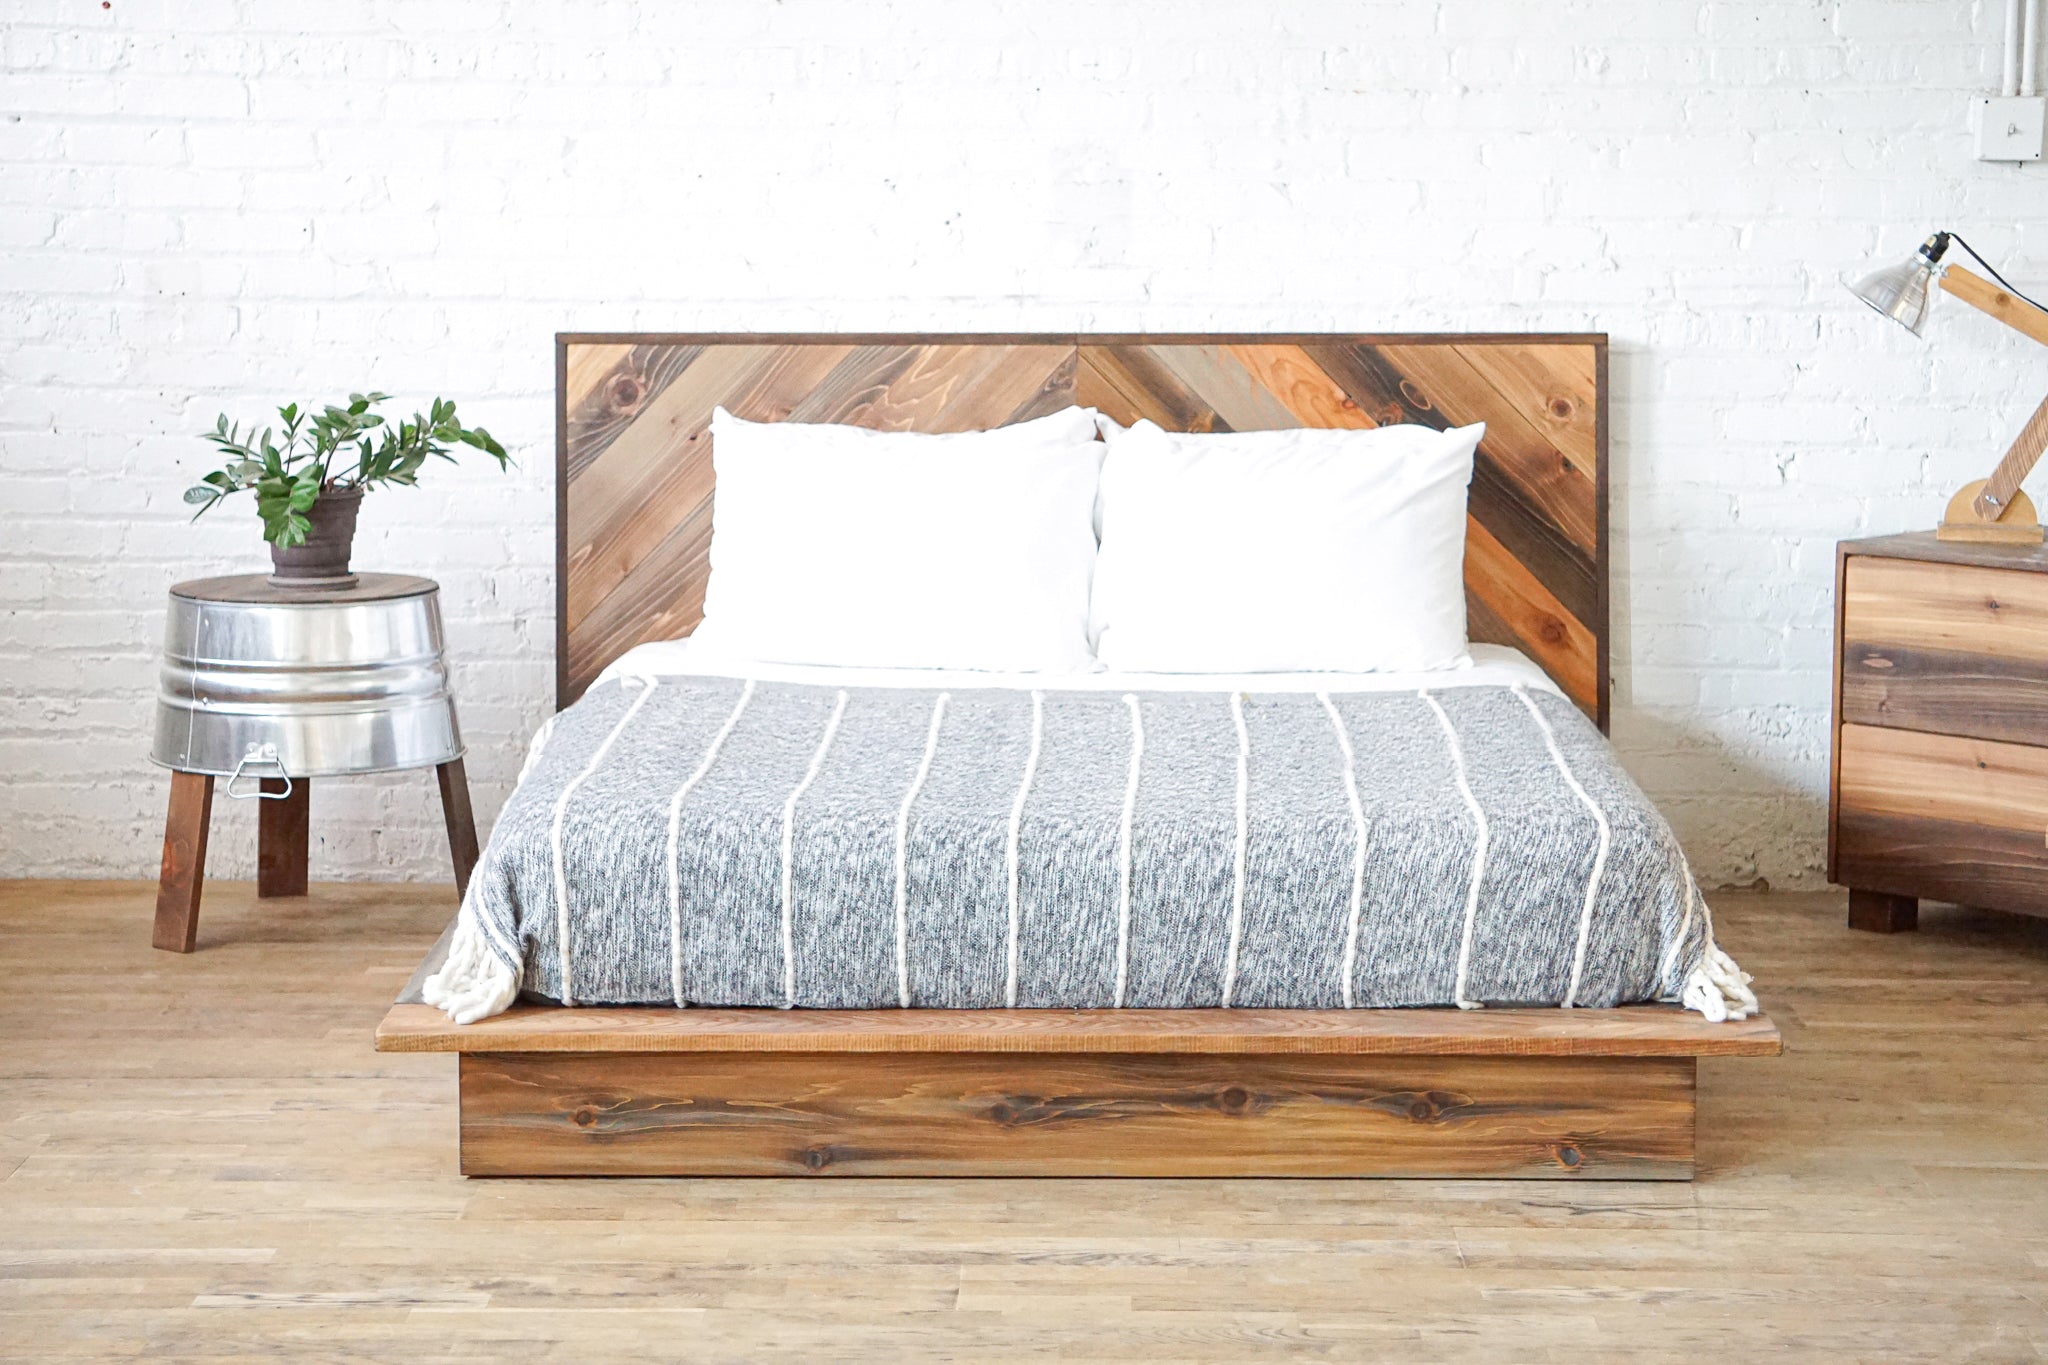 The Chevron Low Pro Bed Frame - Modern Rustic - Organic - Handmade in USA